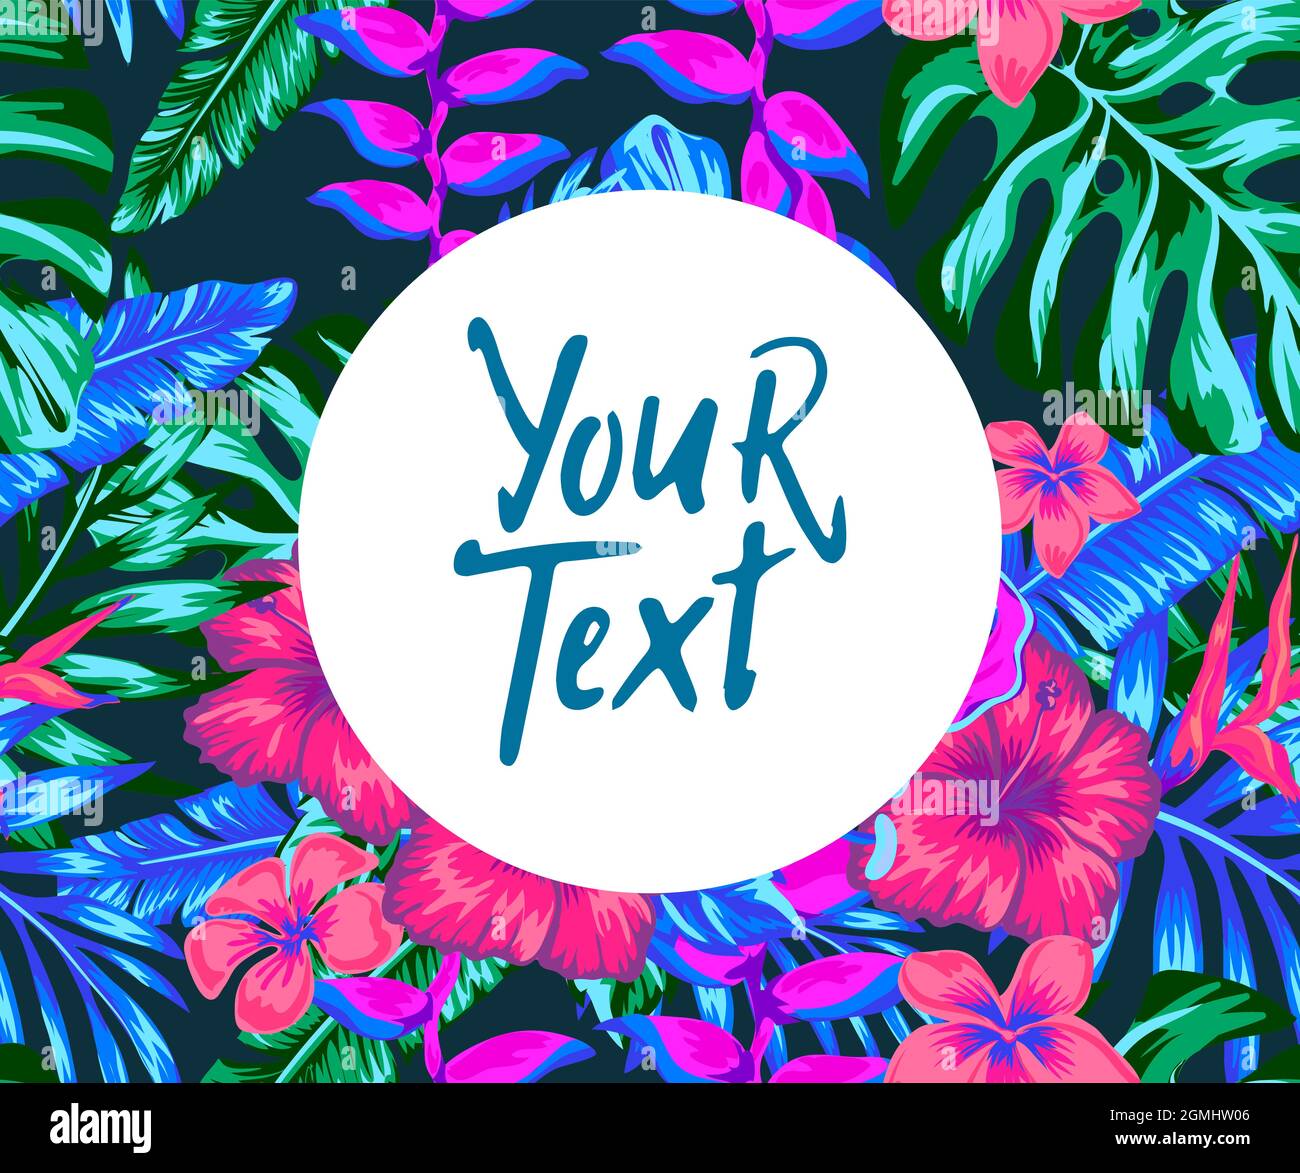 tropic punk seamless pattern, background for flyer or social media post, neon tropics Stock Vector